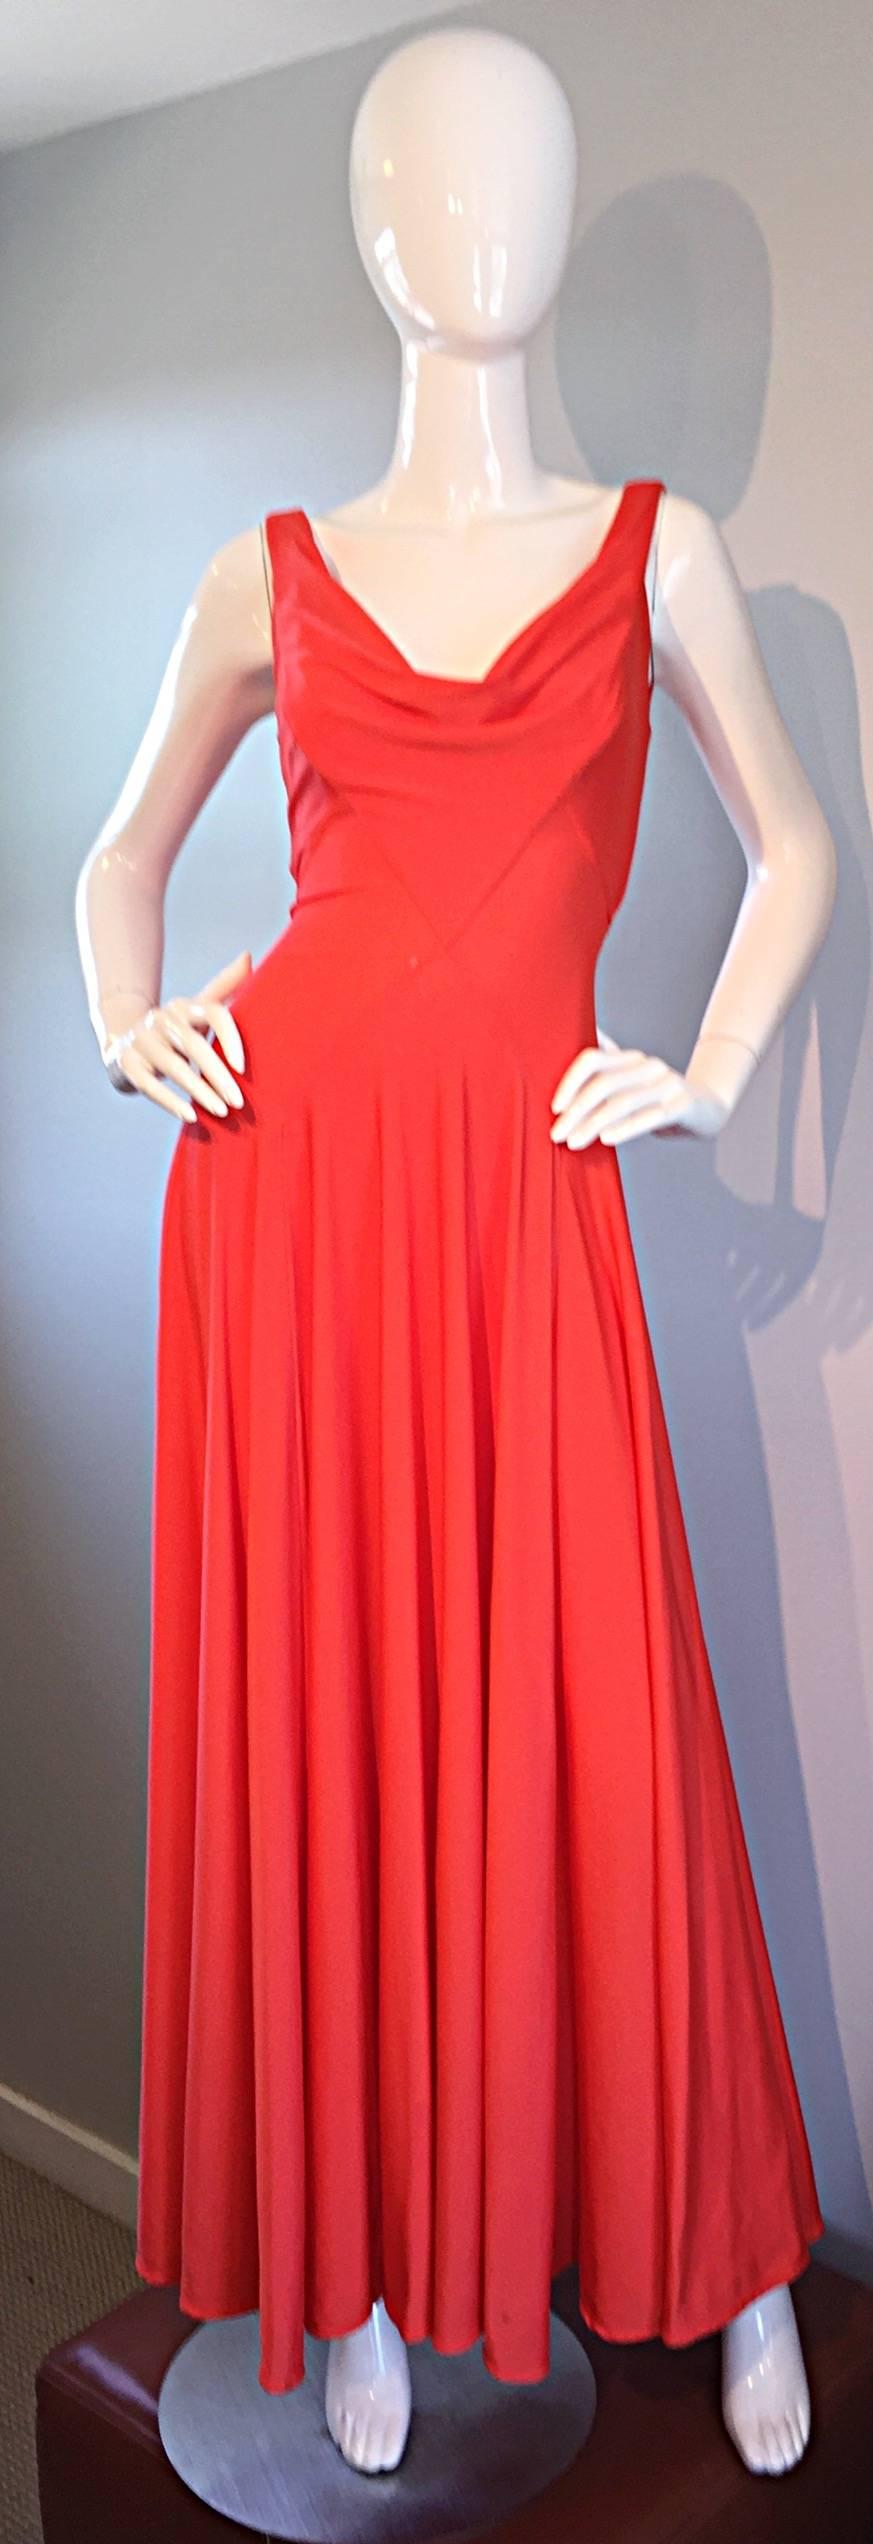 Wonderful 1970s ROBERT DAVID MORTON, for JOSEPH MAGNIN, coral jersey maxi dress! Features flattering/slimming  stitching on the bodice, with a draped collar, and plunging back. Full metal zipper up the back, with hook-and-eye closure. Extremely well